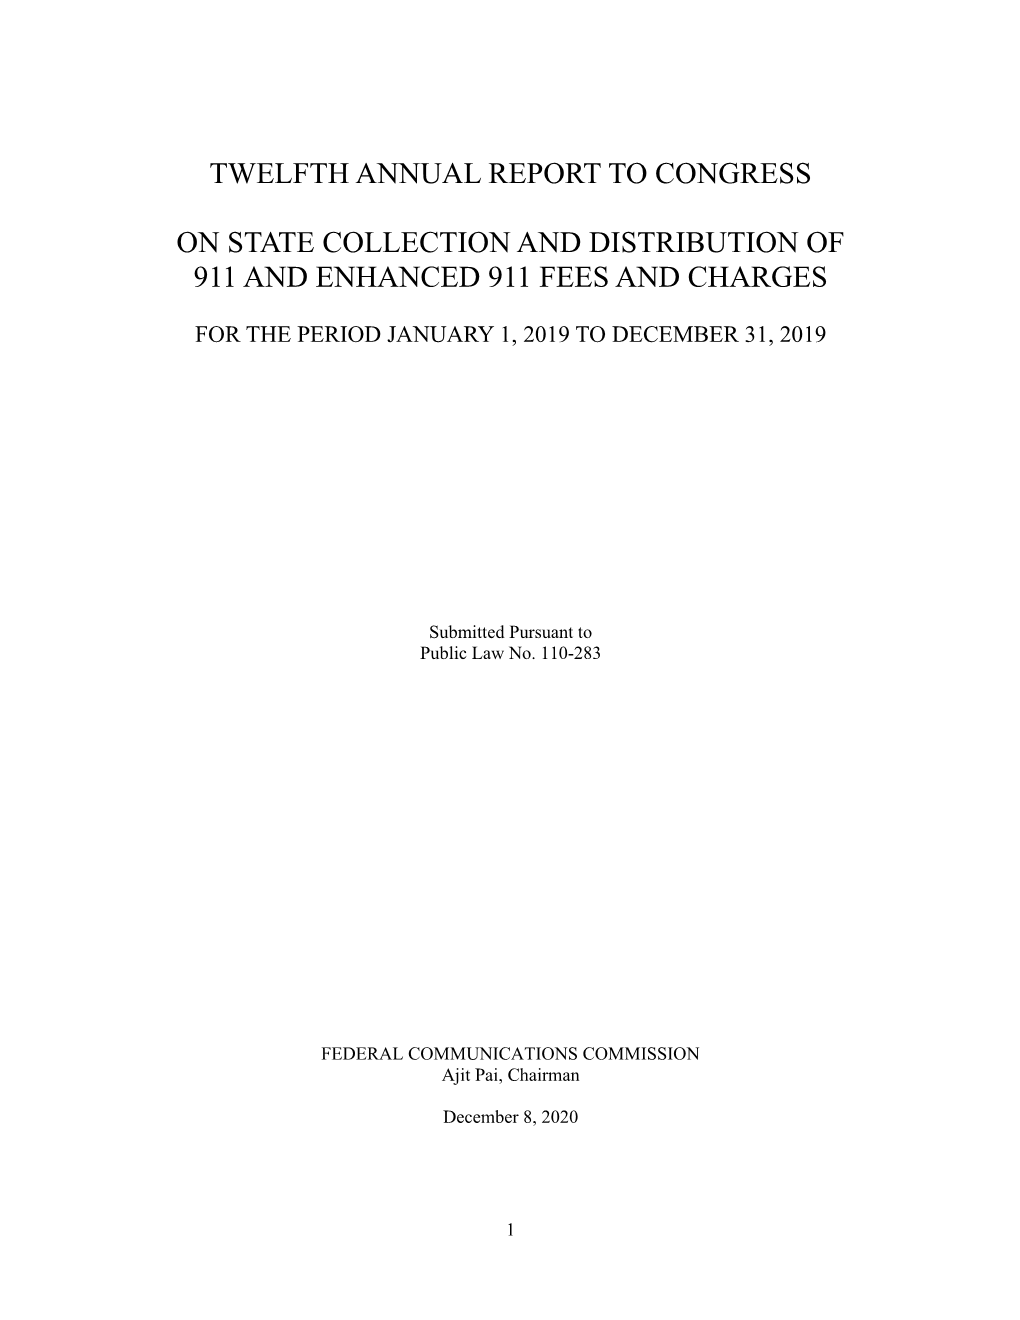 911 Fee and Revenue Report to Congress